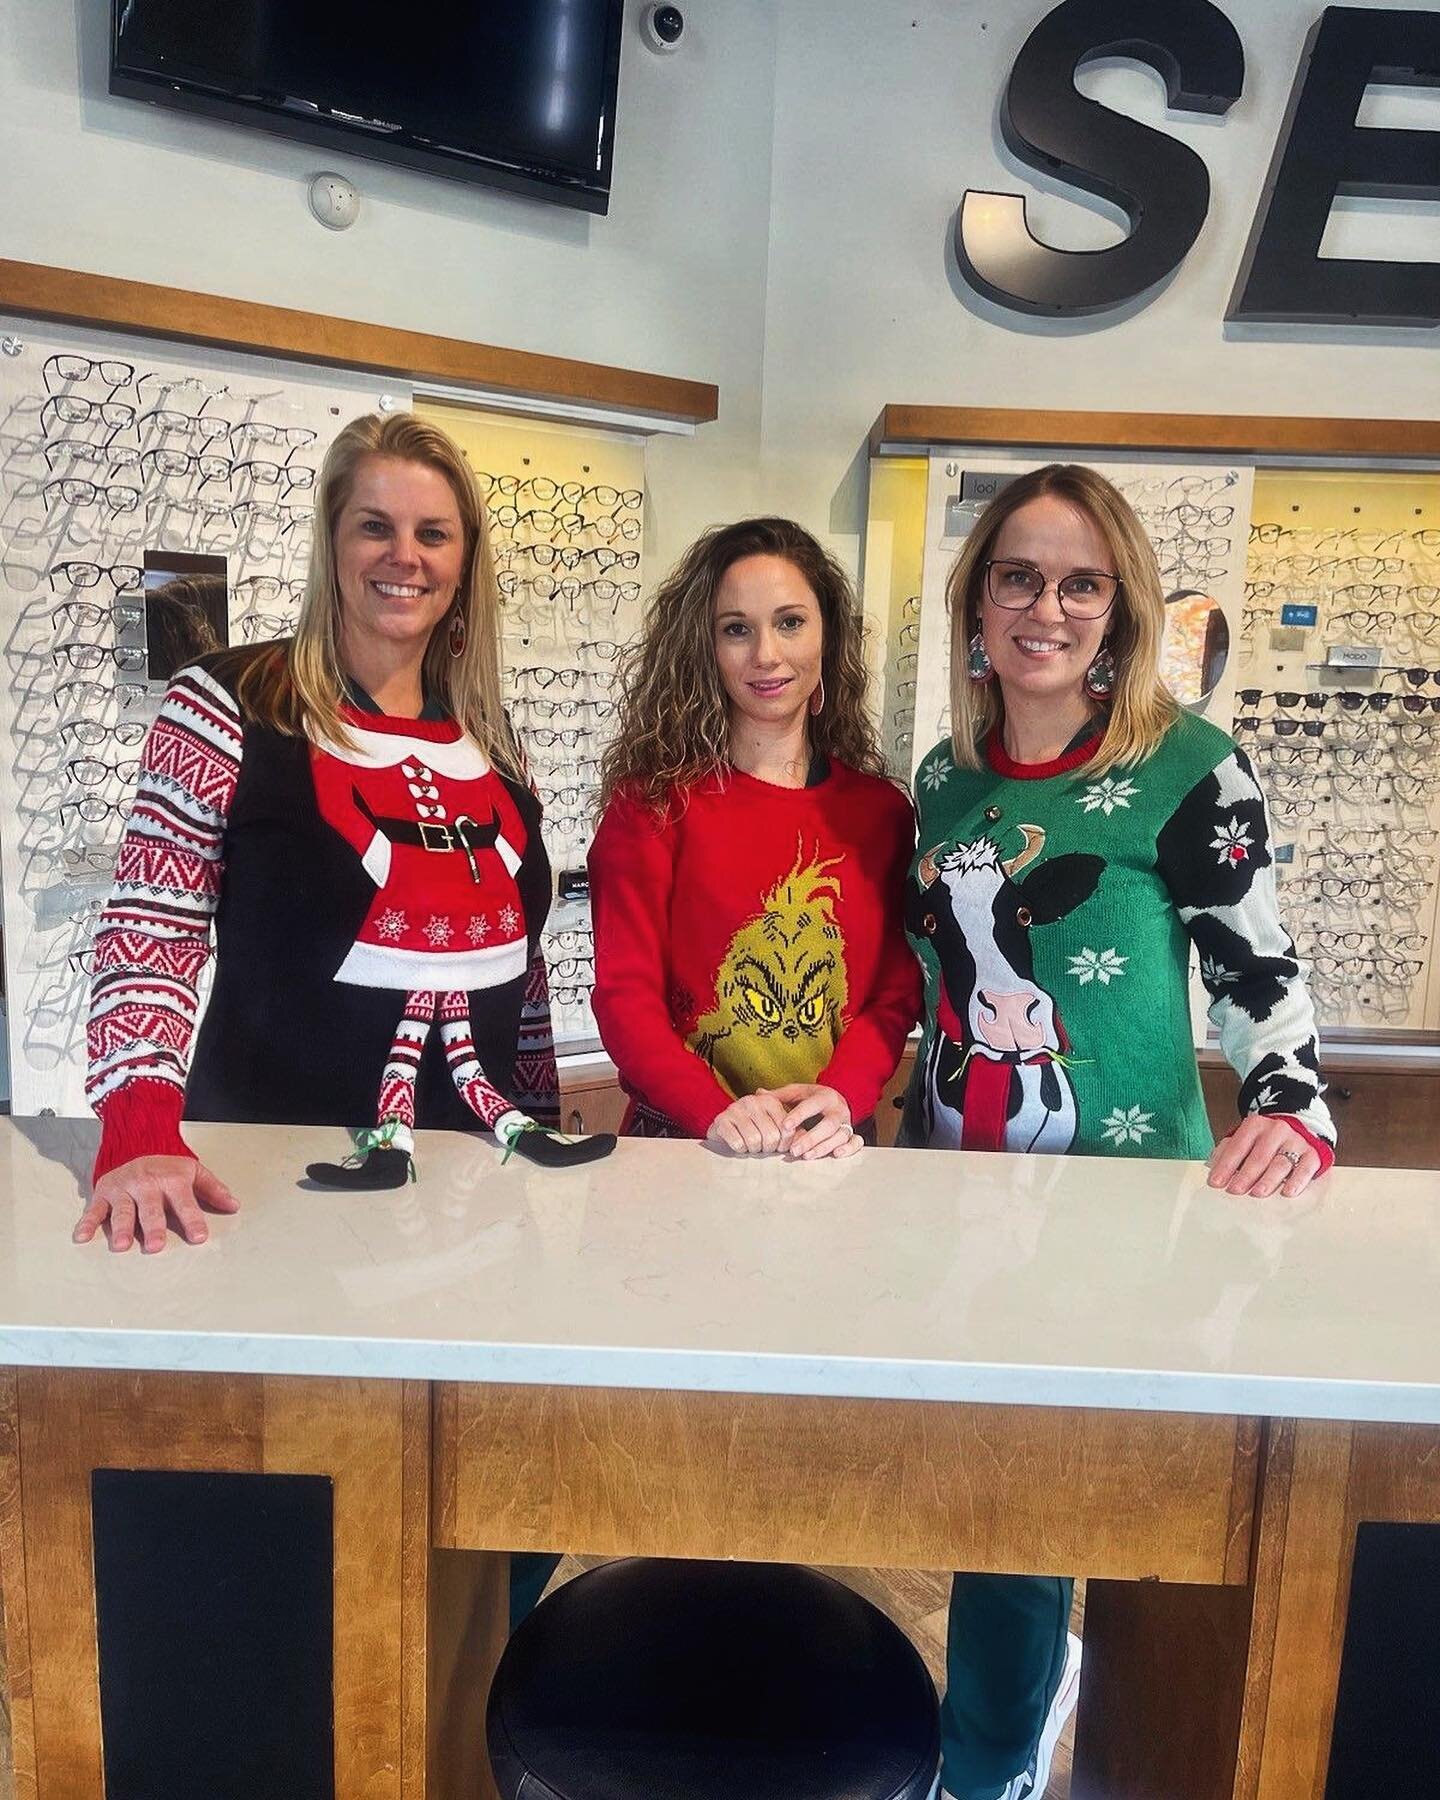 Christmas glee for all to SEE! Friday December 8th only!
Wear your favorite Christmas sweater/shirt and receive 10% off prescription glasses or non prescription sunglasses (private pay or with insurance).